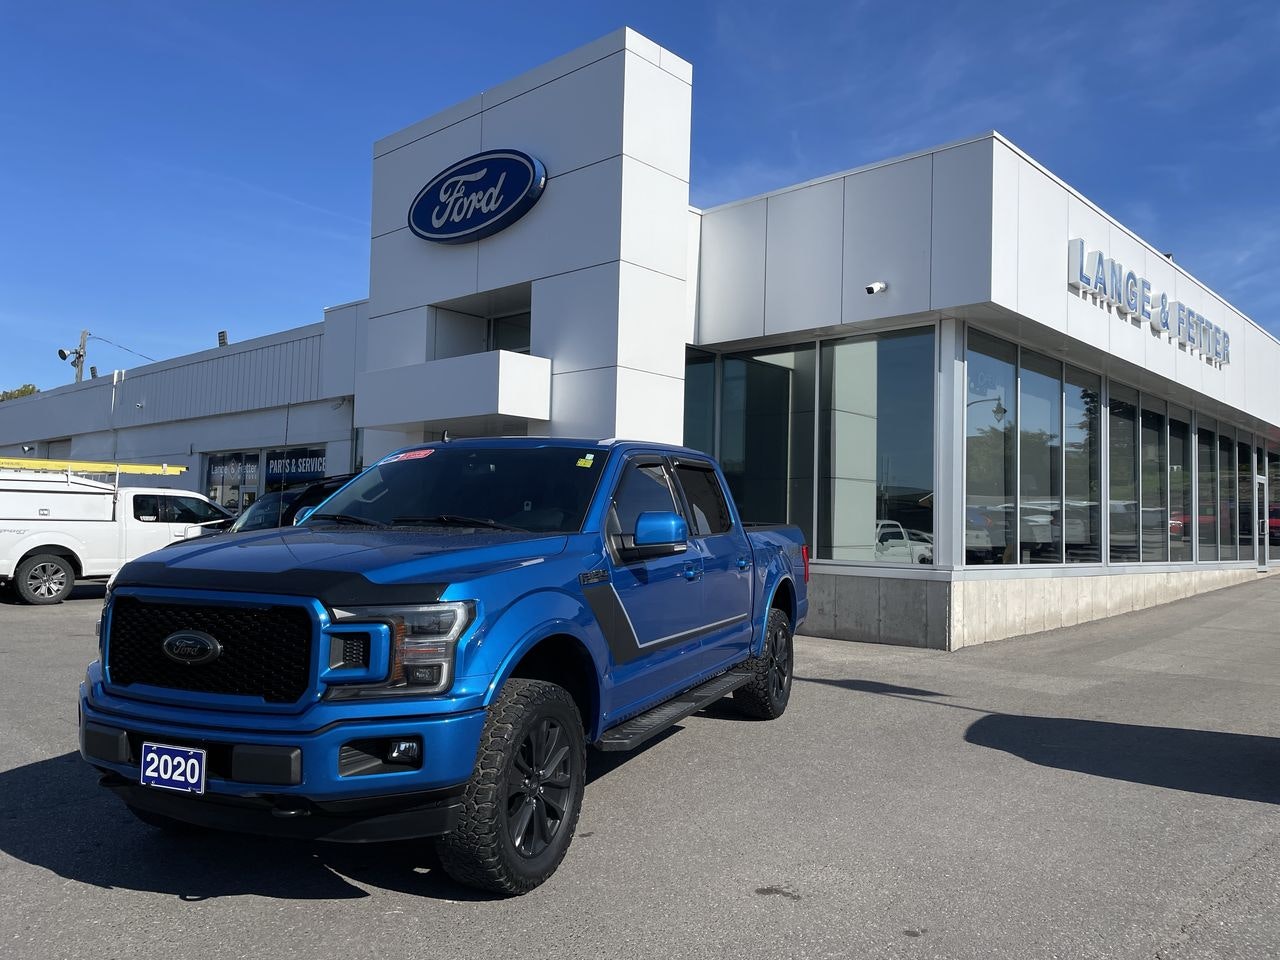 2020 Ford F-150 - 21299A Full Image 1